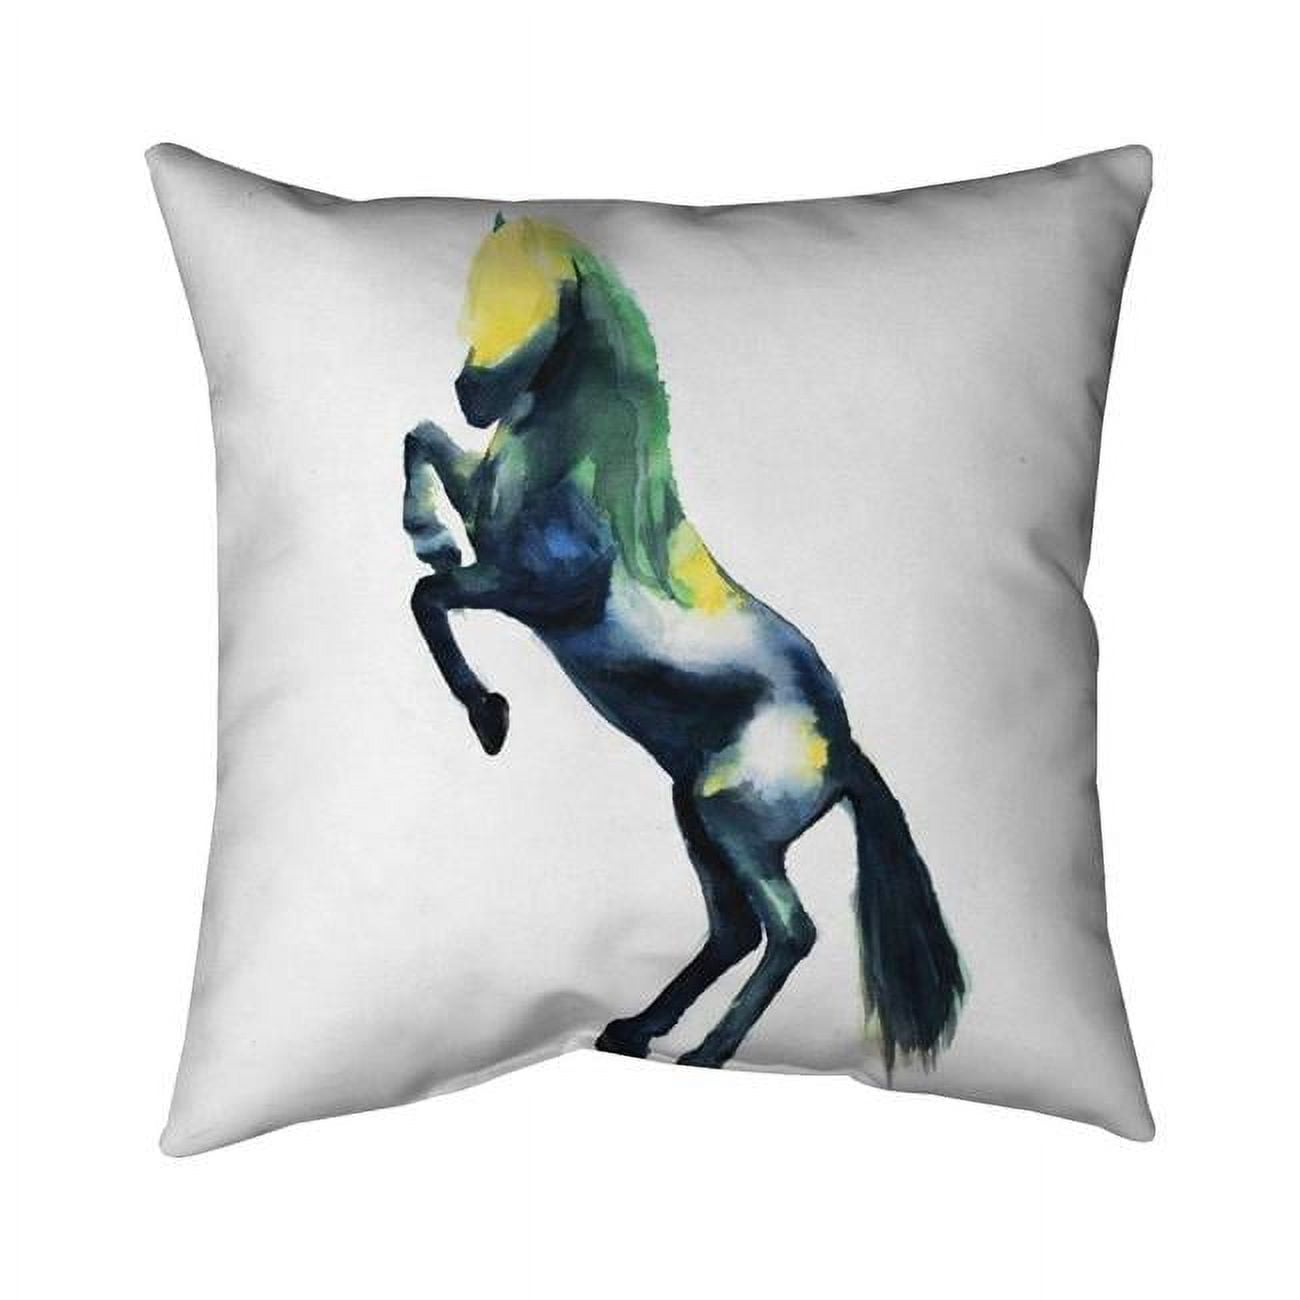 Begin Home Decor 5543-1616-AN367 16 x 16 in. Greeting Horse-Double Sided Print Indoor Pillow Cover